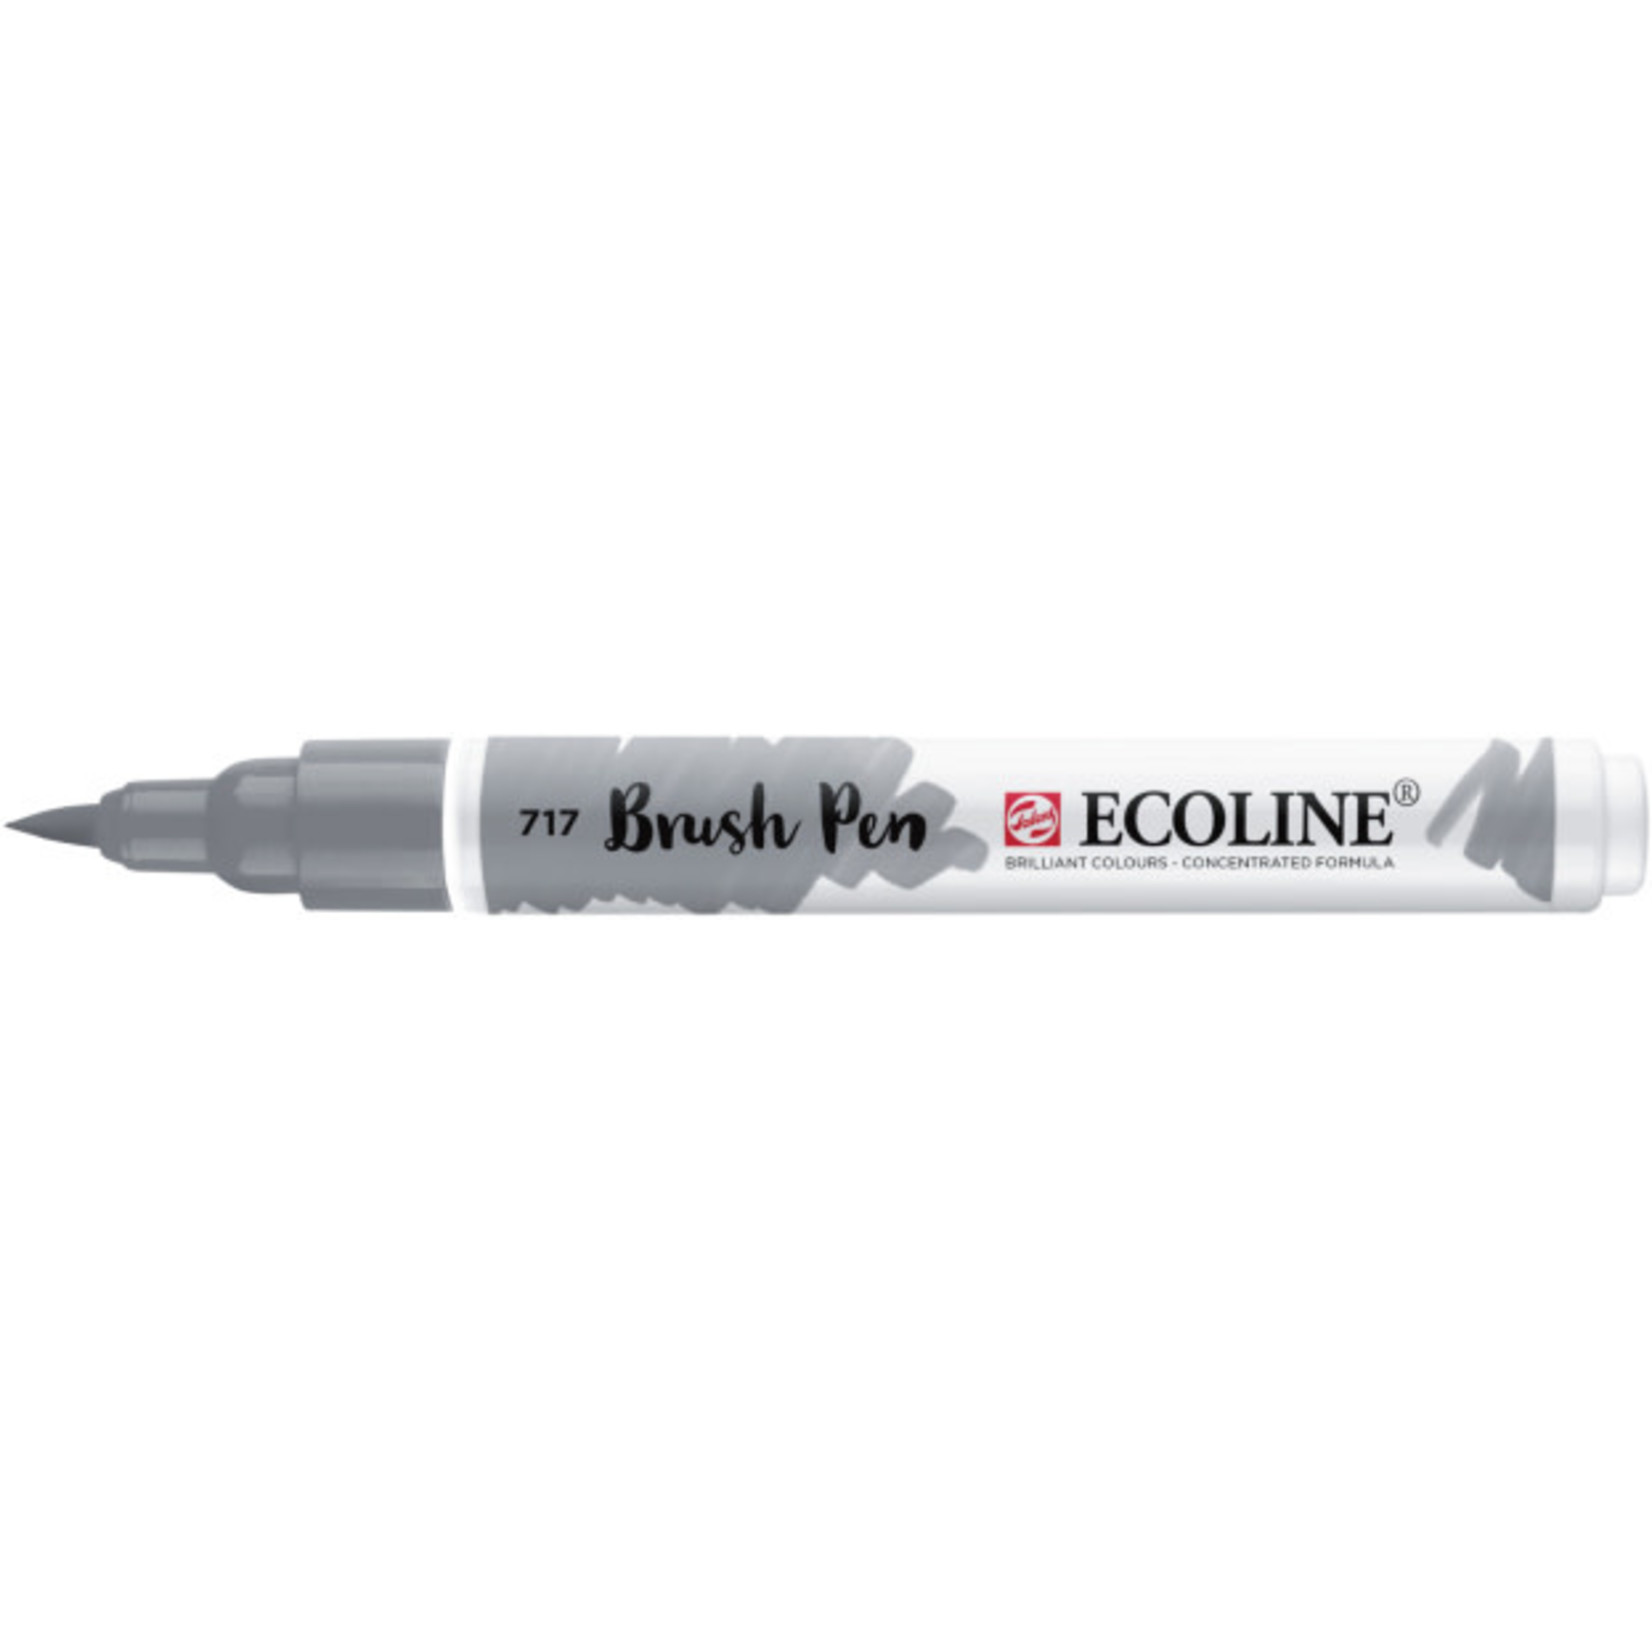 Talens Brush Pen "Ecoline" waterverf - Cold Grey n° 717